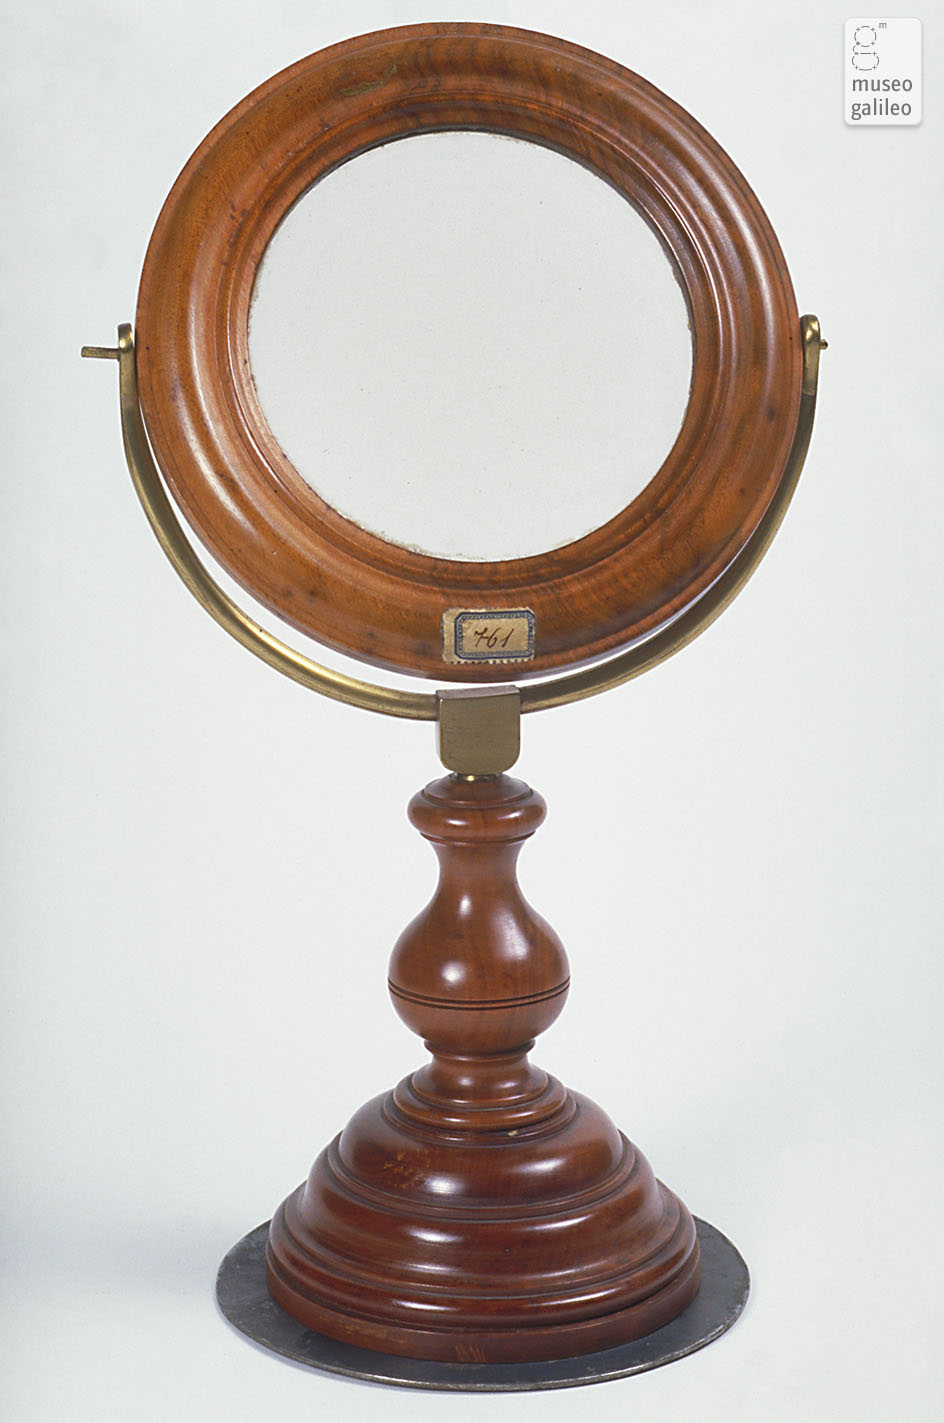 Lens with stand (Inv. 761)